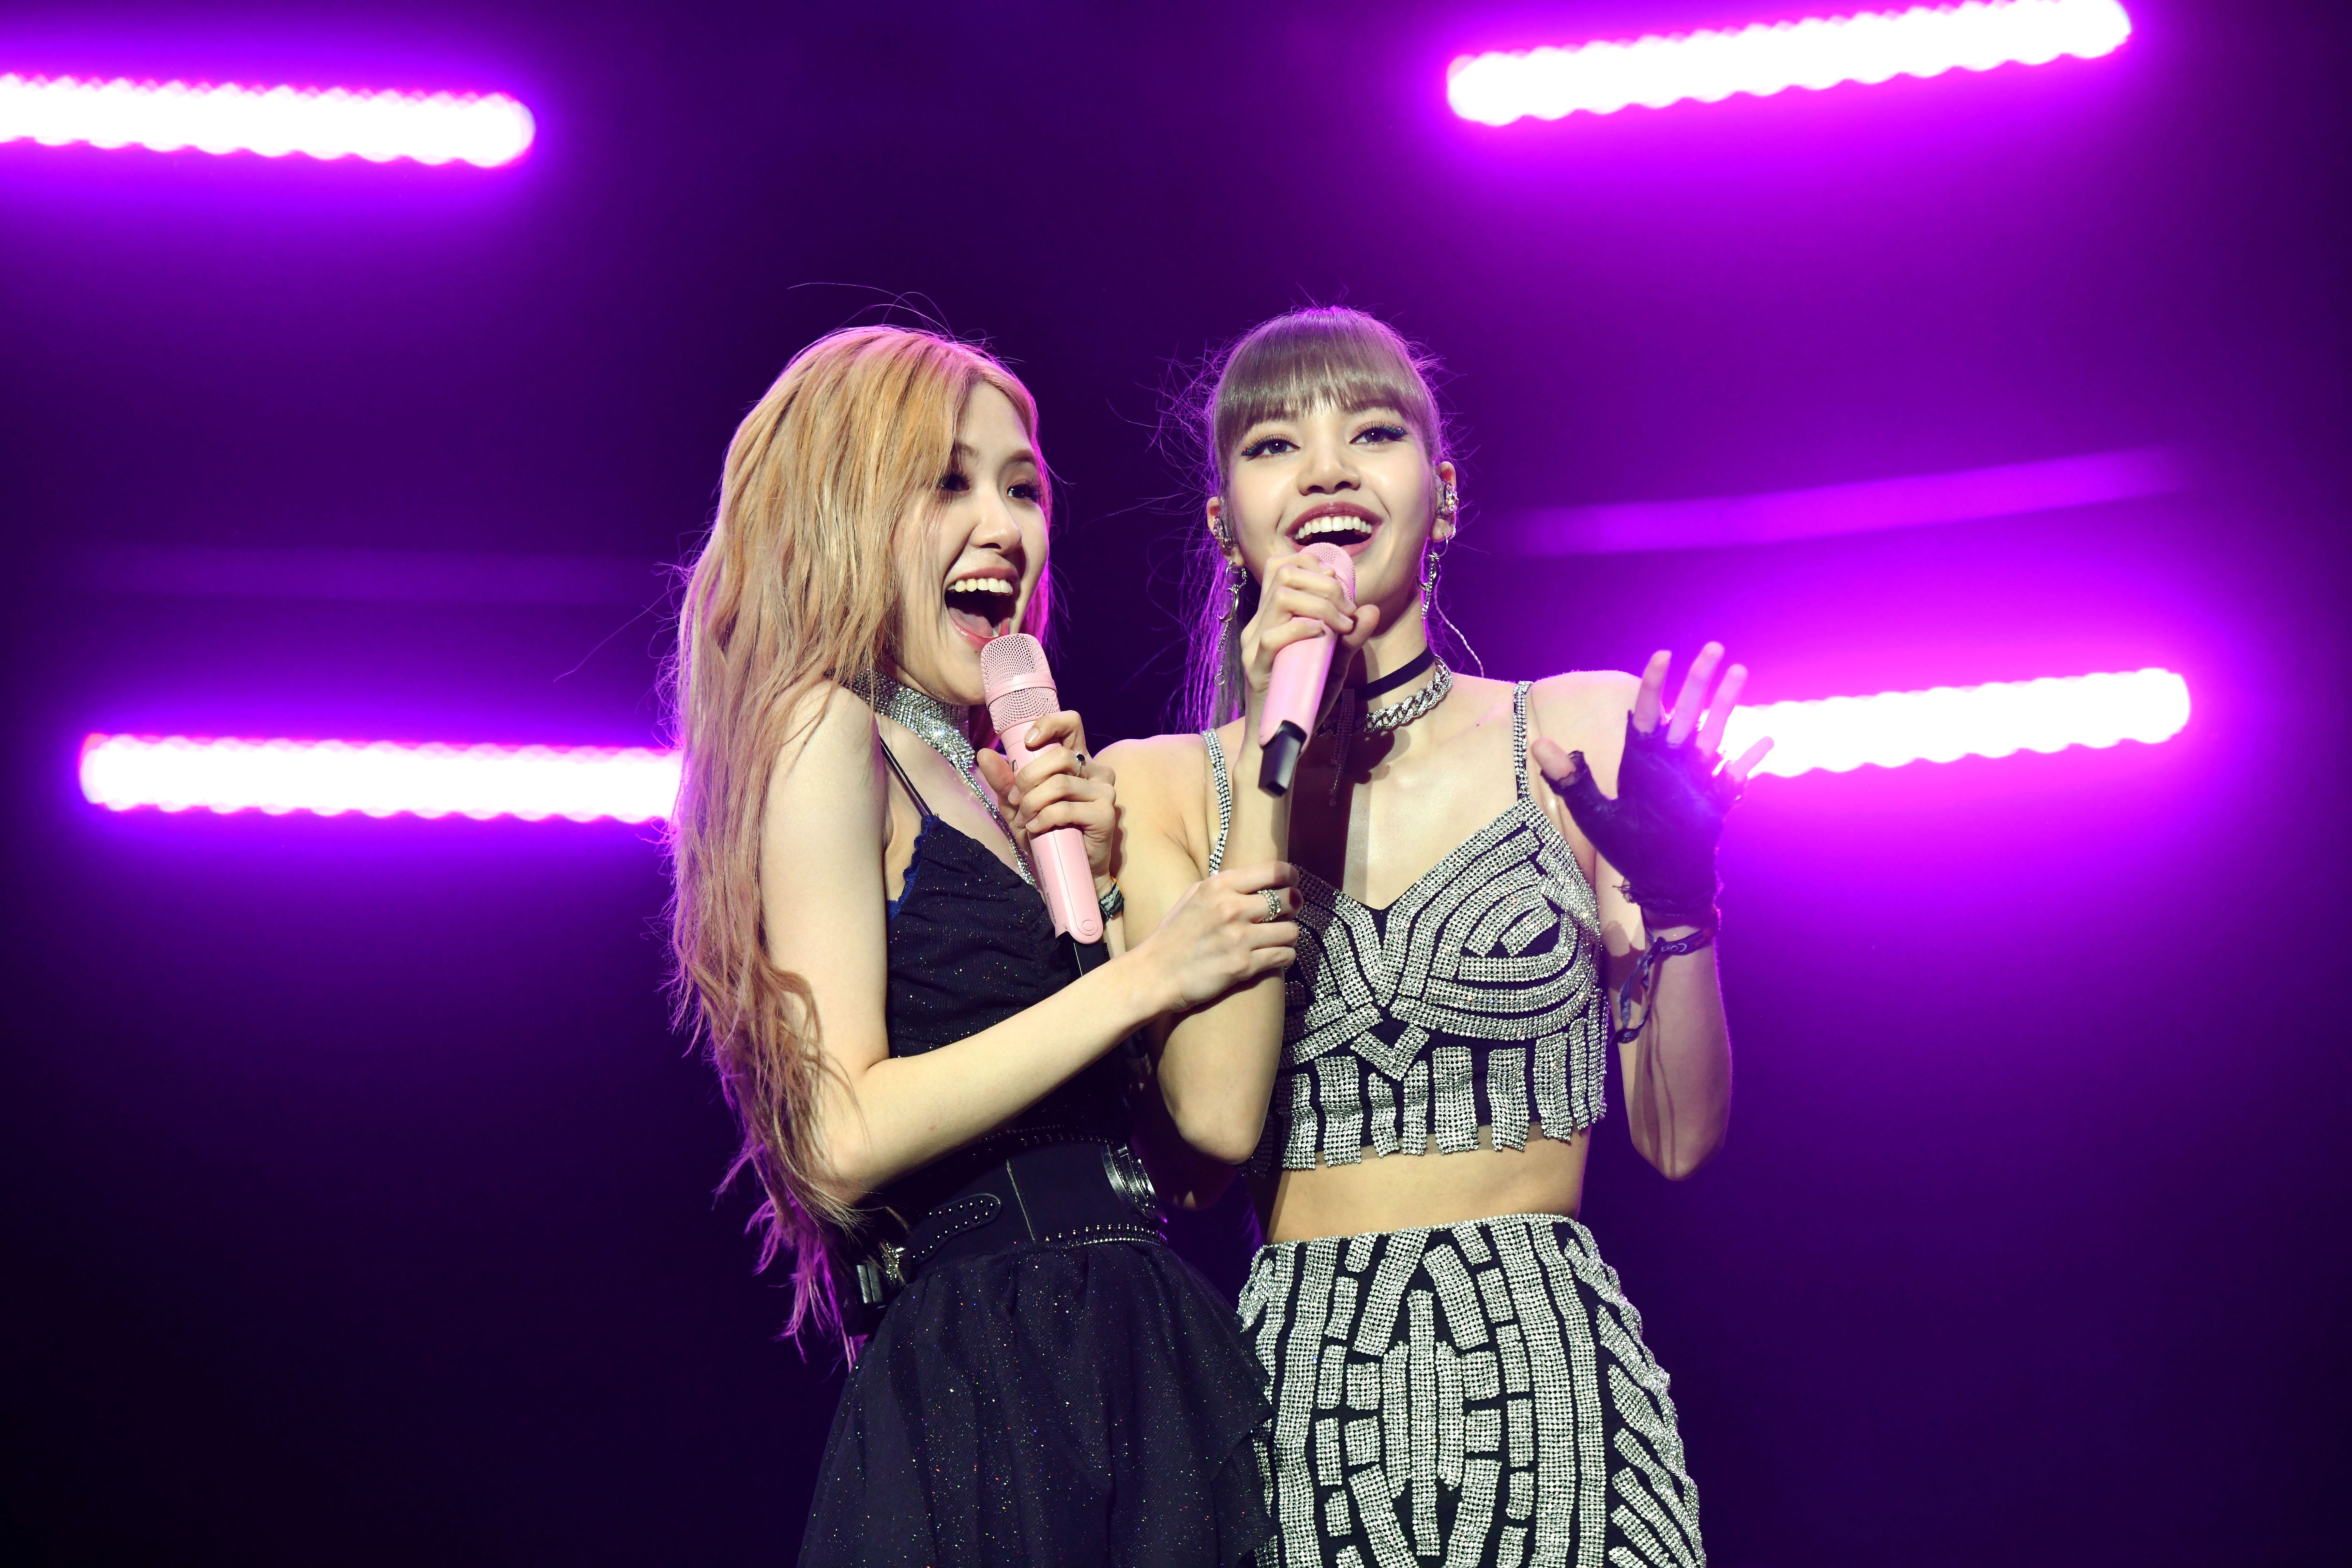 Singers Rosé and Lisa of BLACKPINK perform during the 2019 Coachella Valley Music and Arts Festival